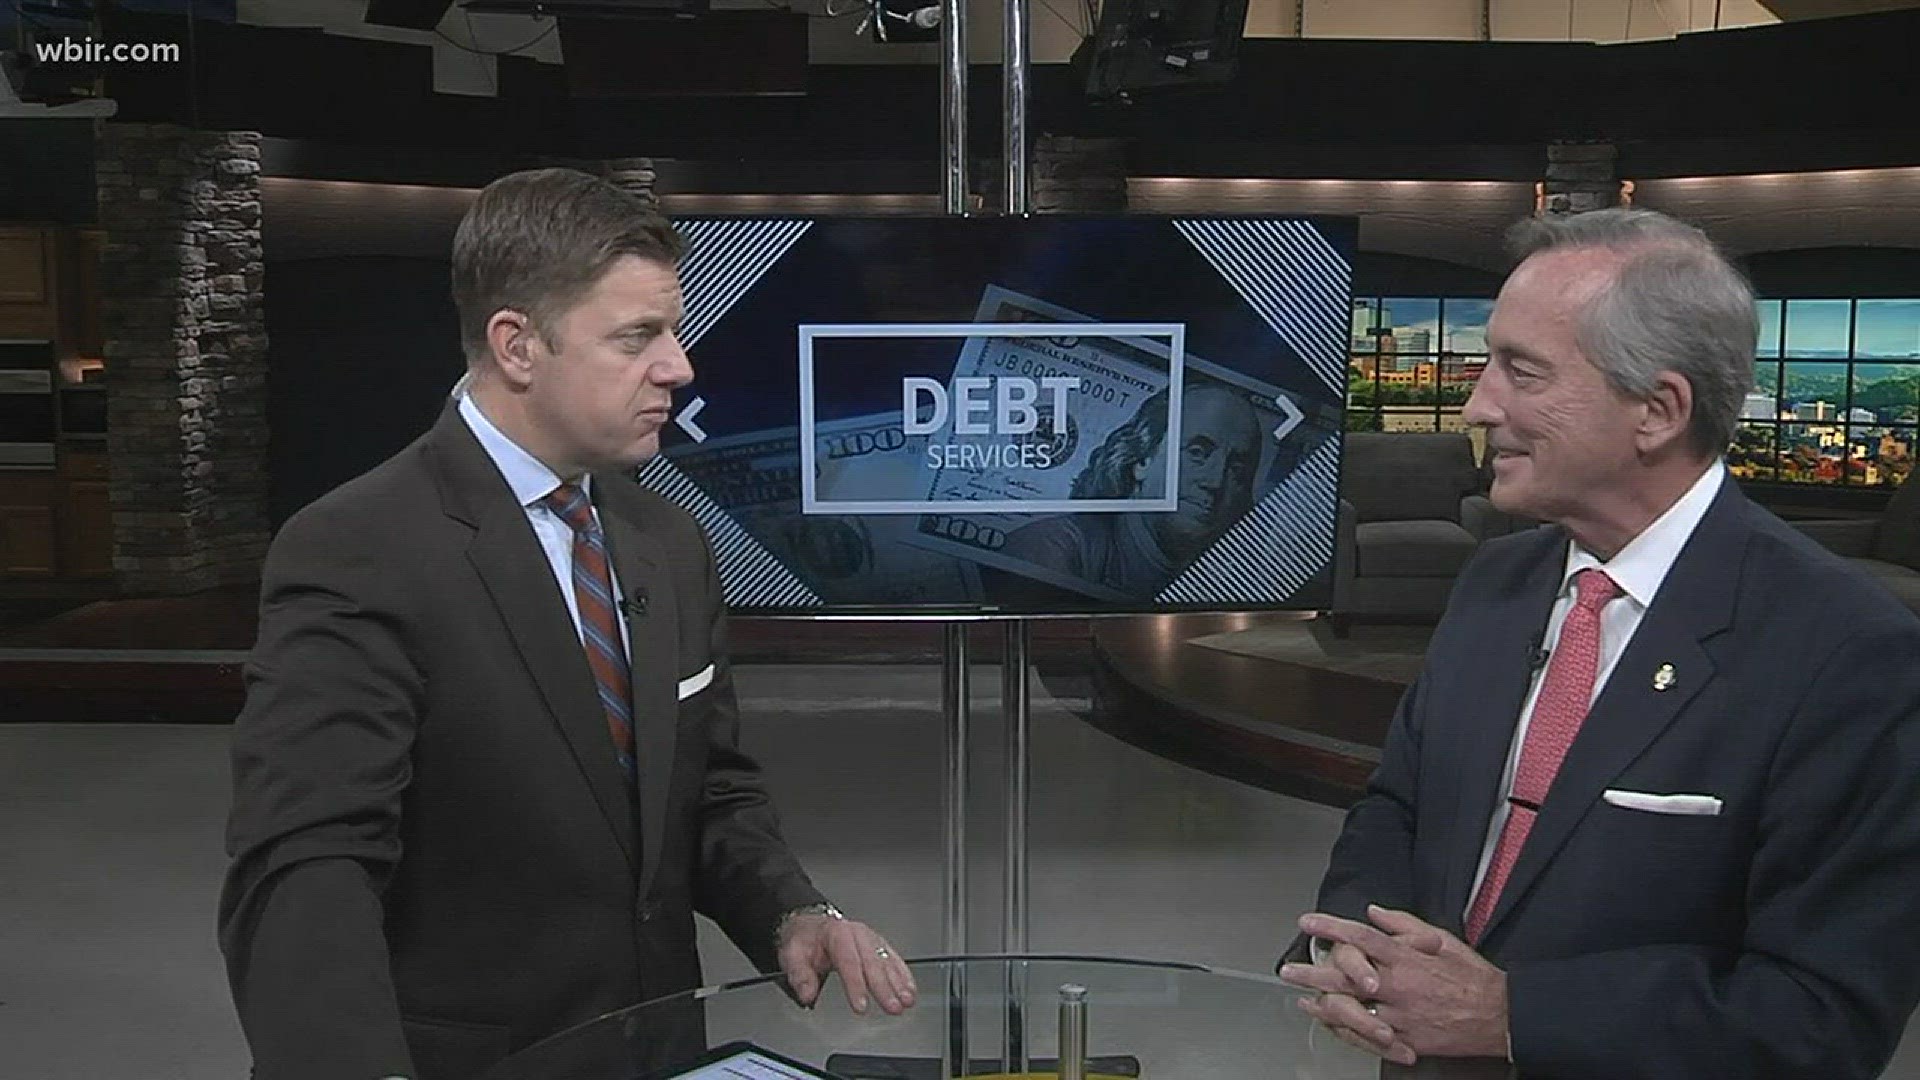 Knox County Mayoral Candidate Bob Thomas discusses debt services and taxes